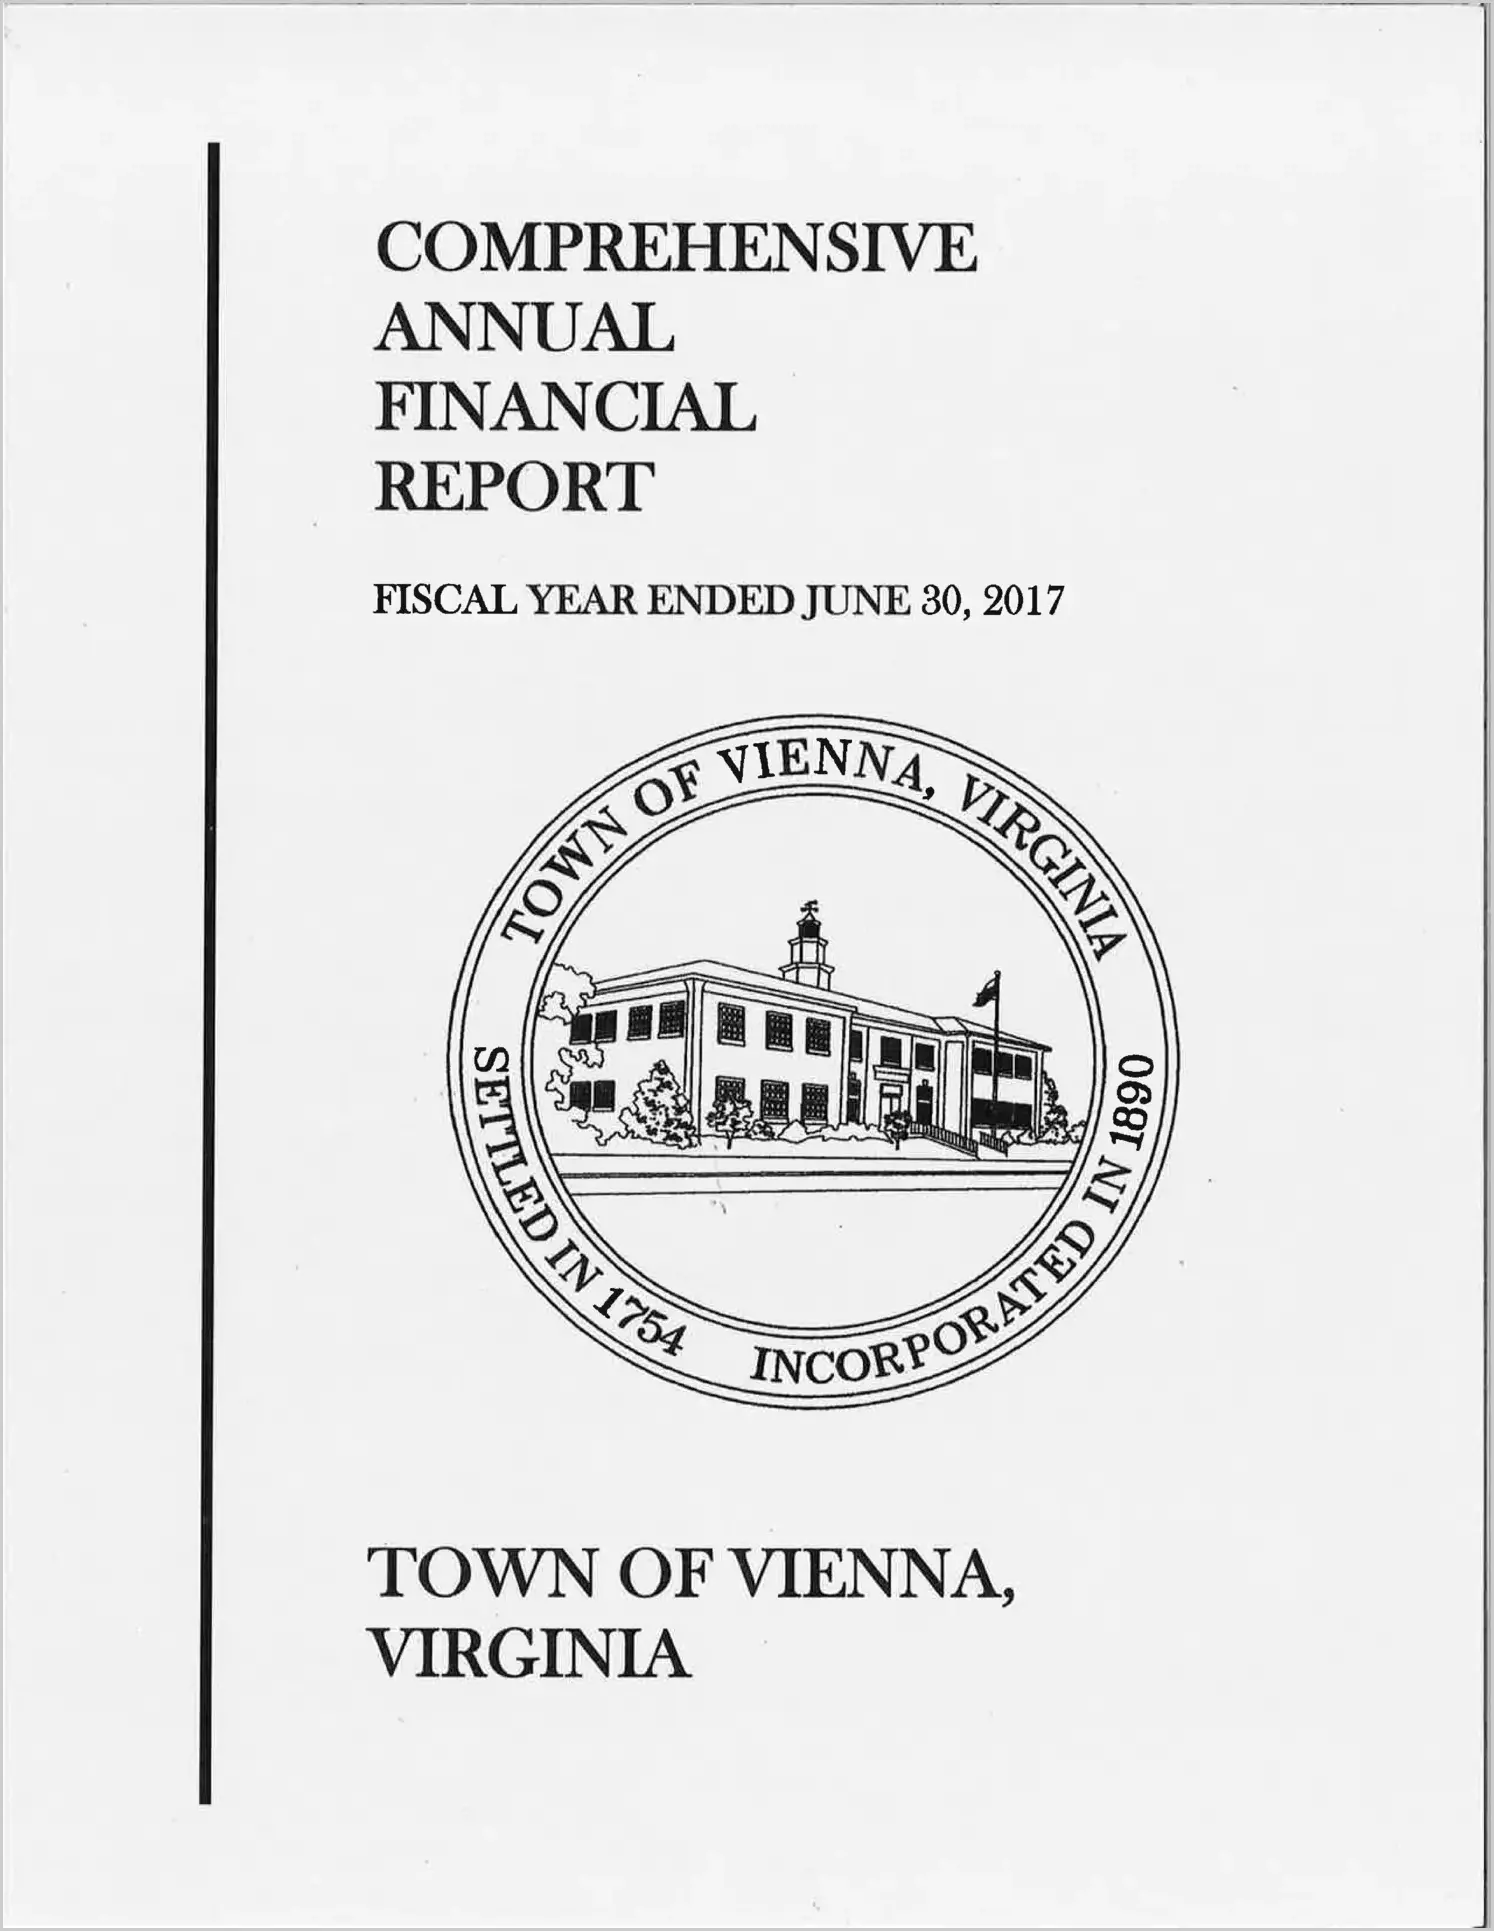 2017 Annual Financial Report for Town of Vienna